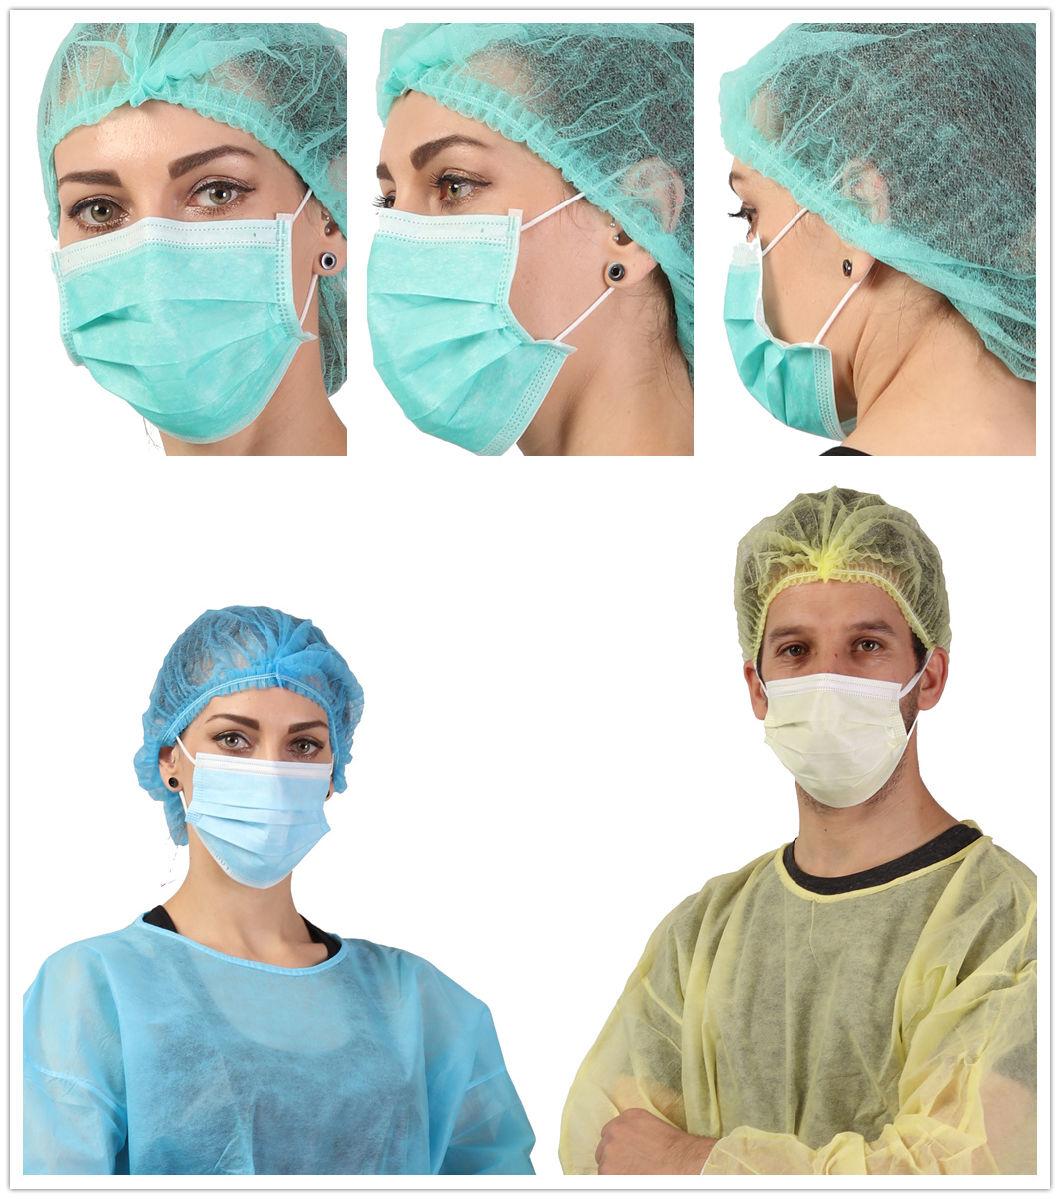 3 Ply Dental Disposable Blue Color Face Mask Adult Use